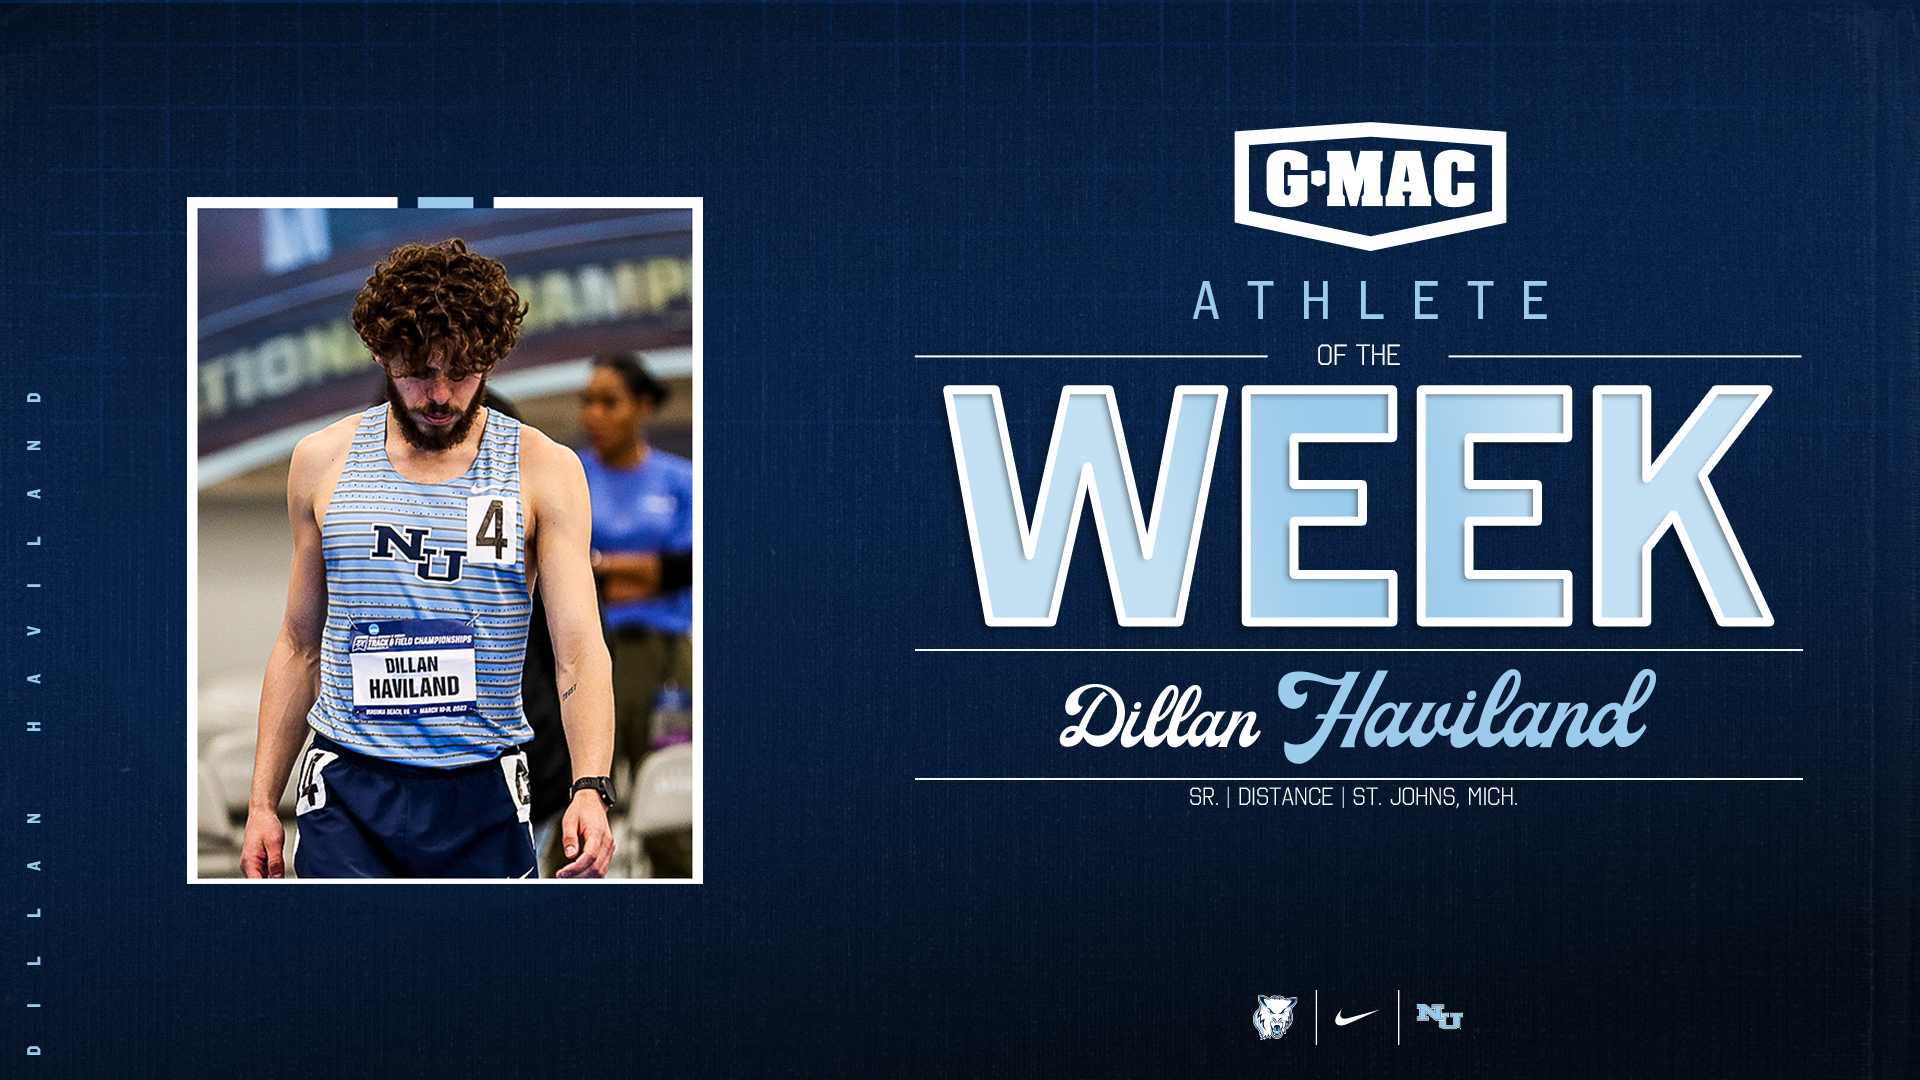 Make It Six - Haviland Earns Sixth Career Athlete of Week Honor, This For Indoor Track